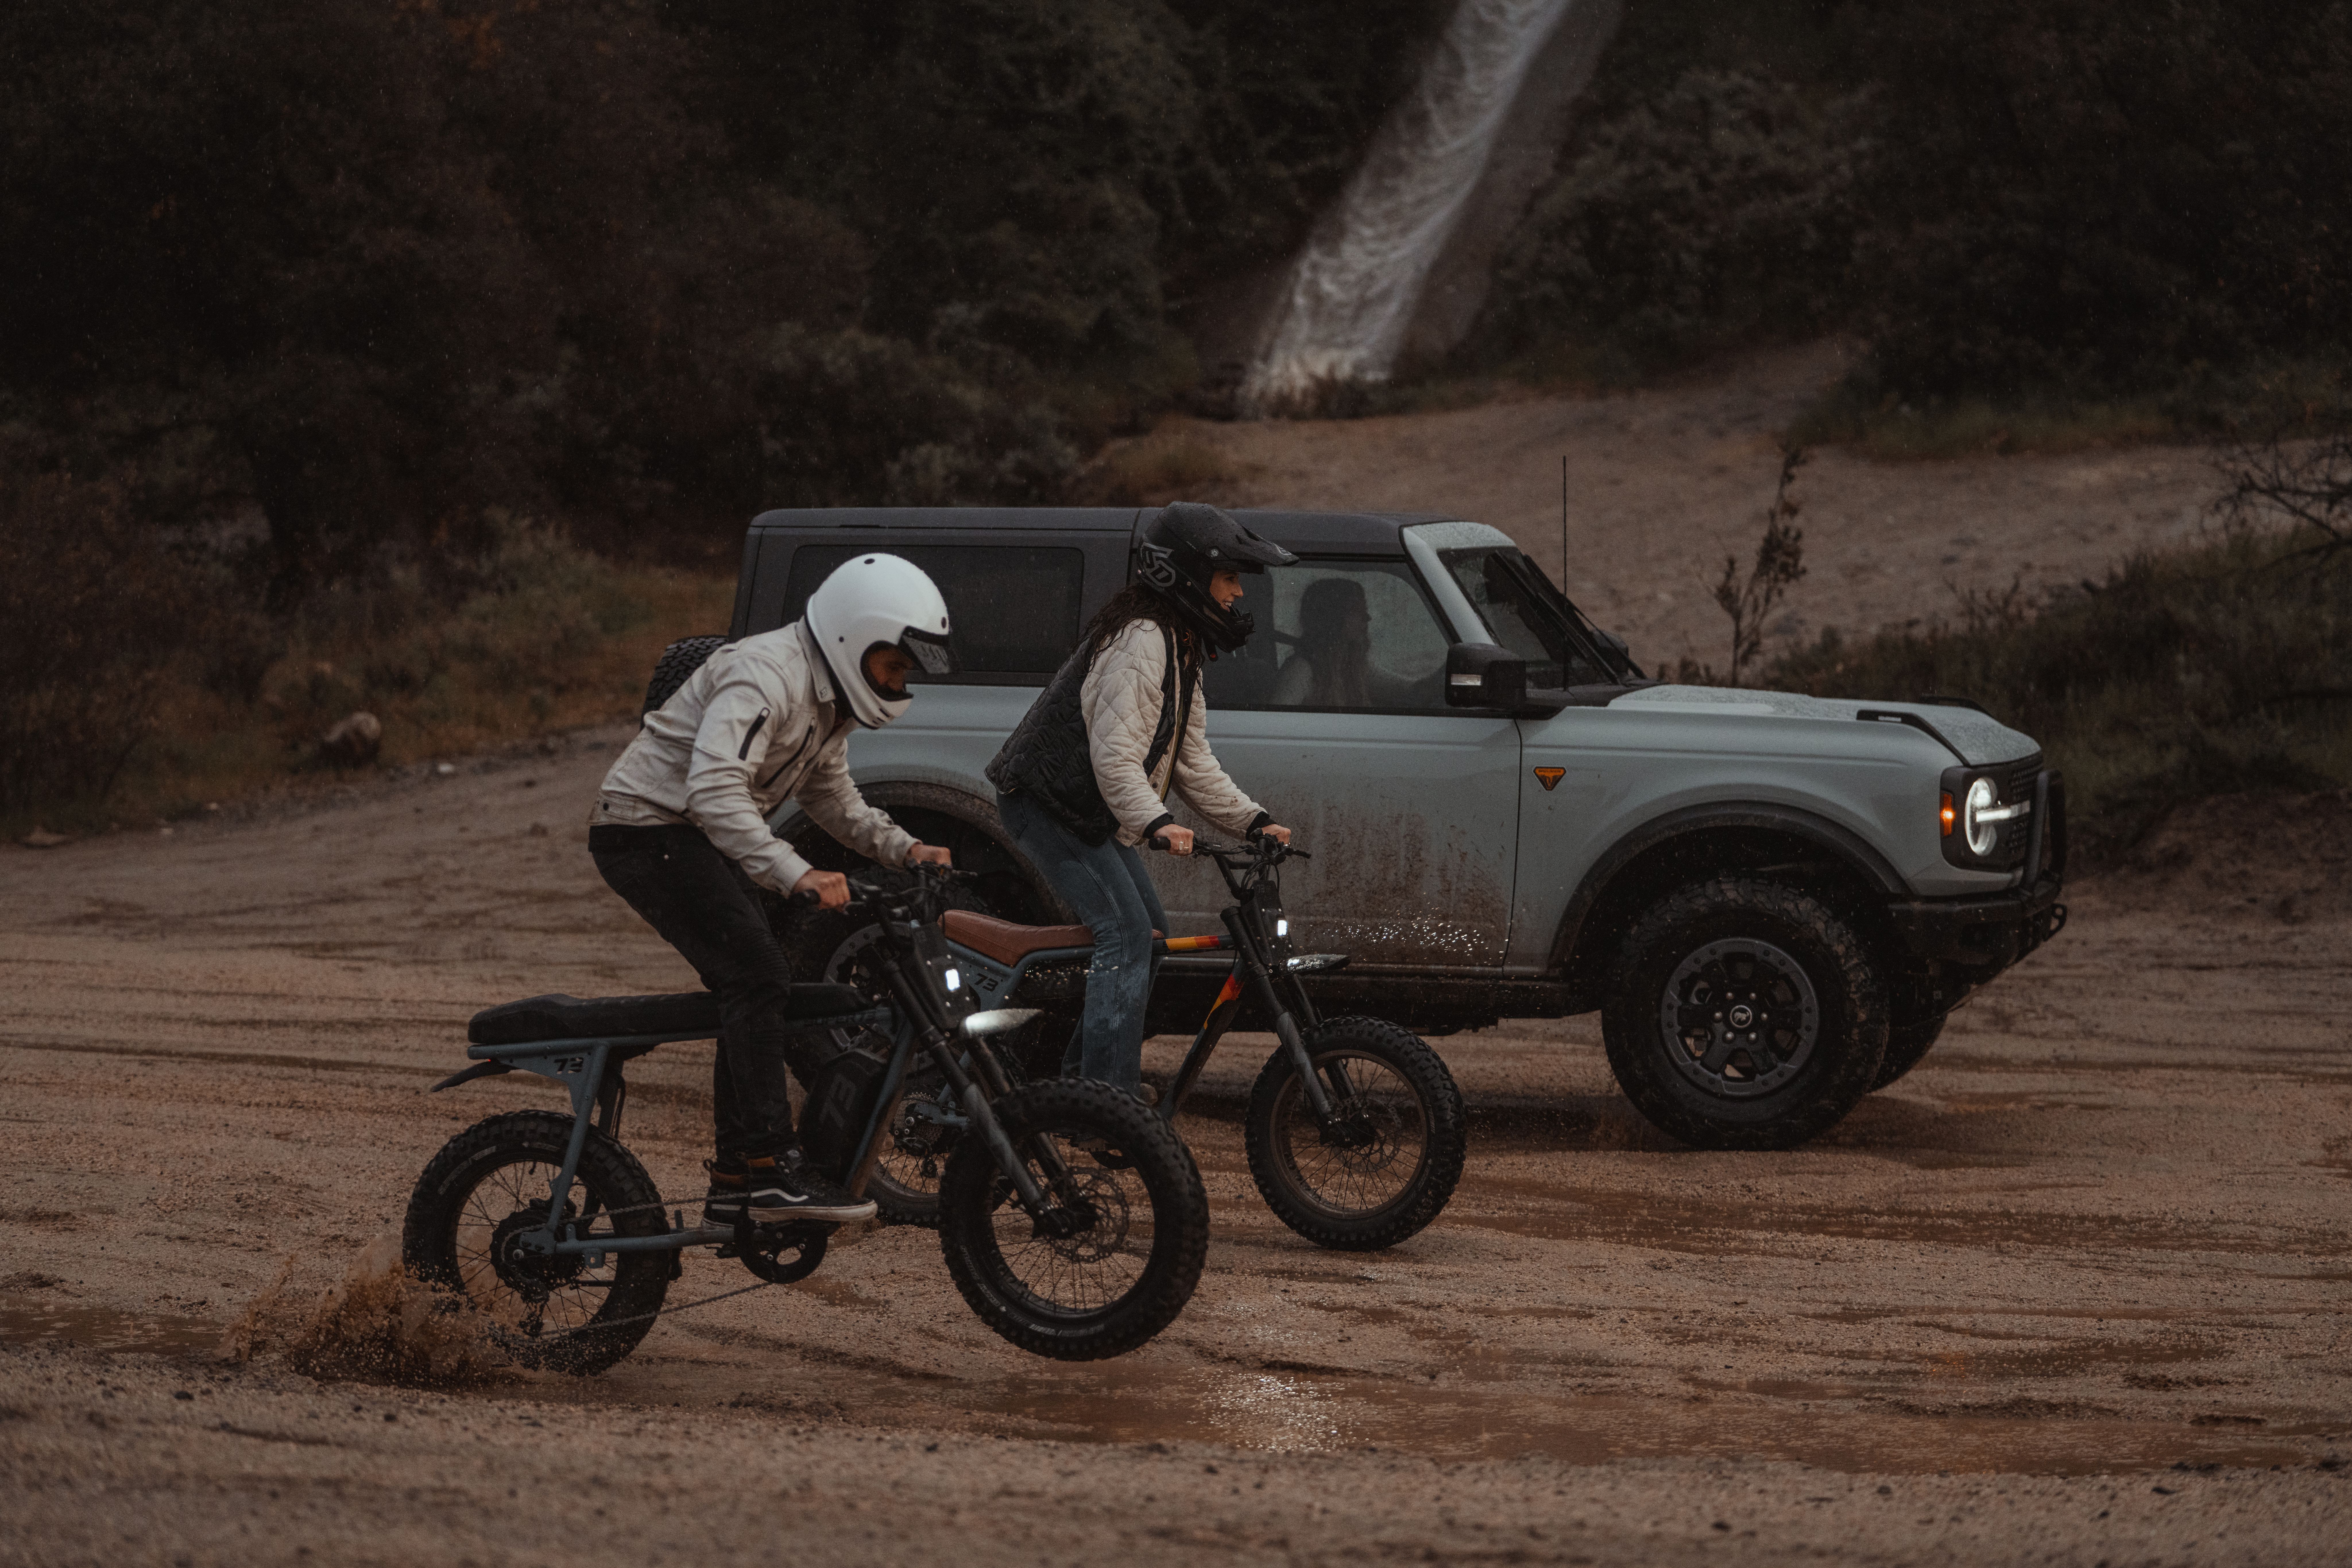 Two electric bikes riding in the mud next to a bronco truck